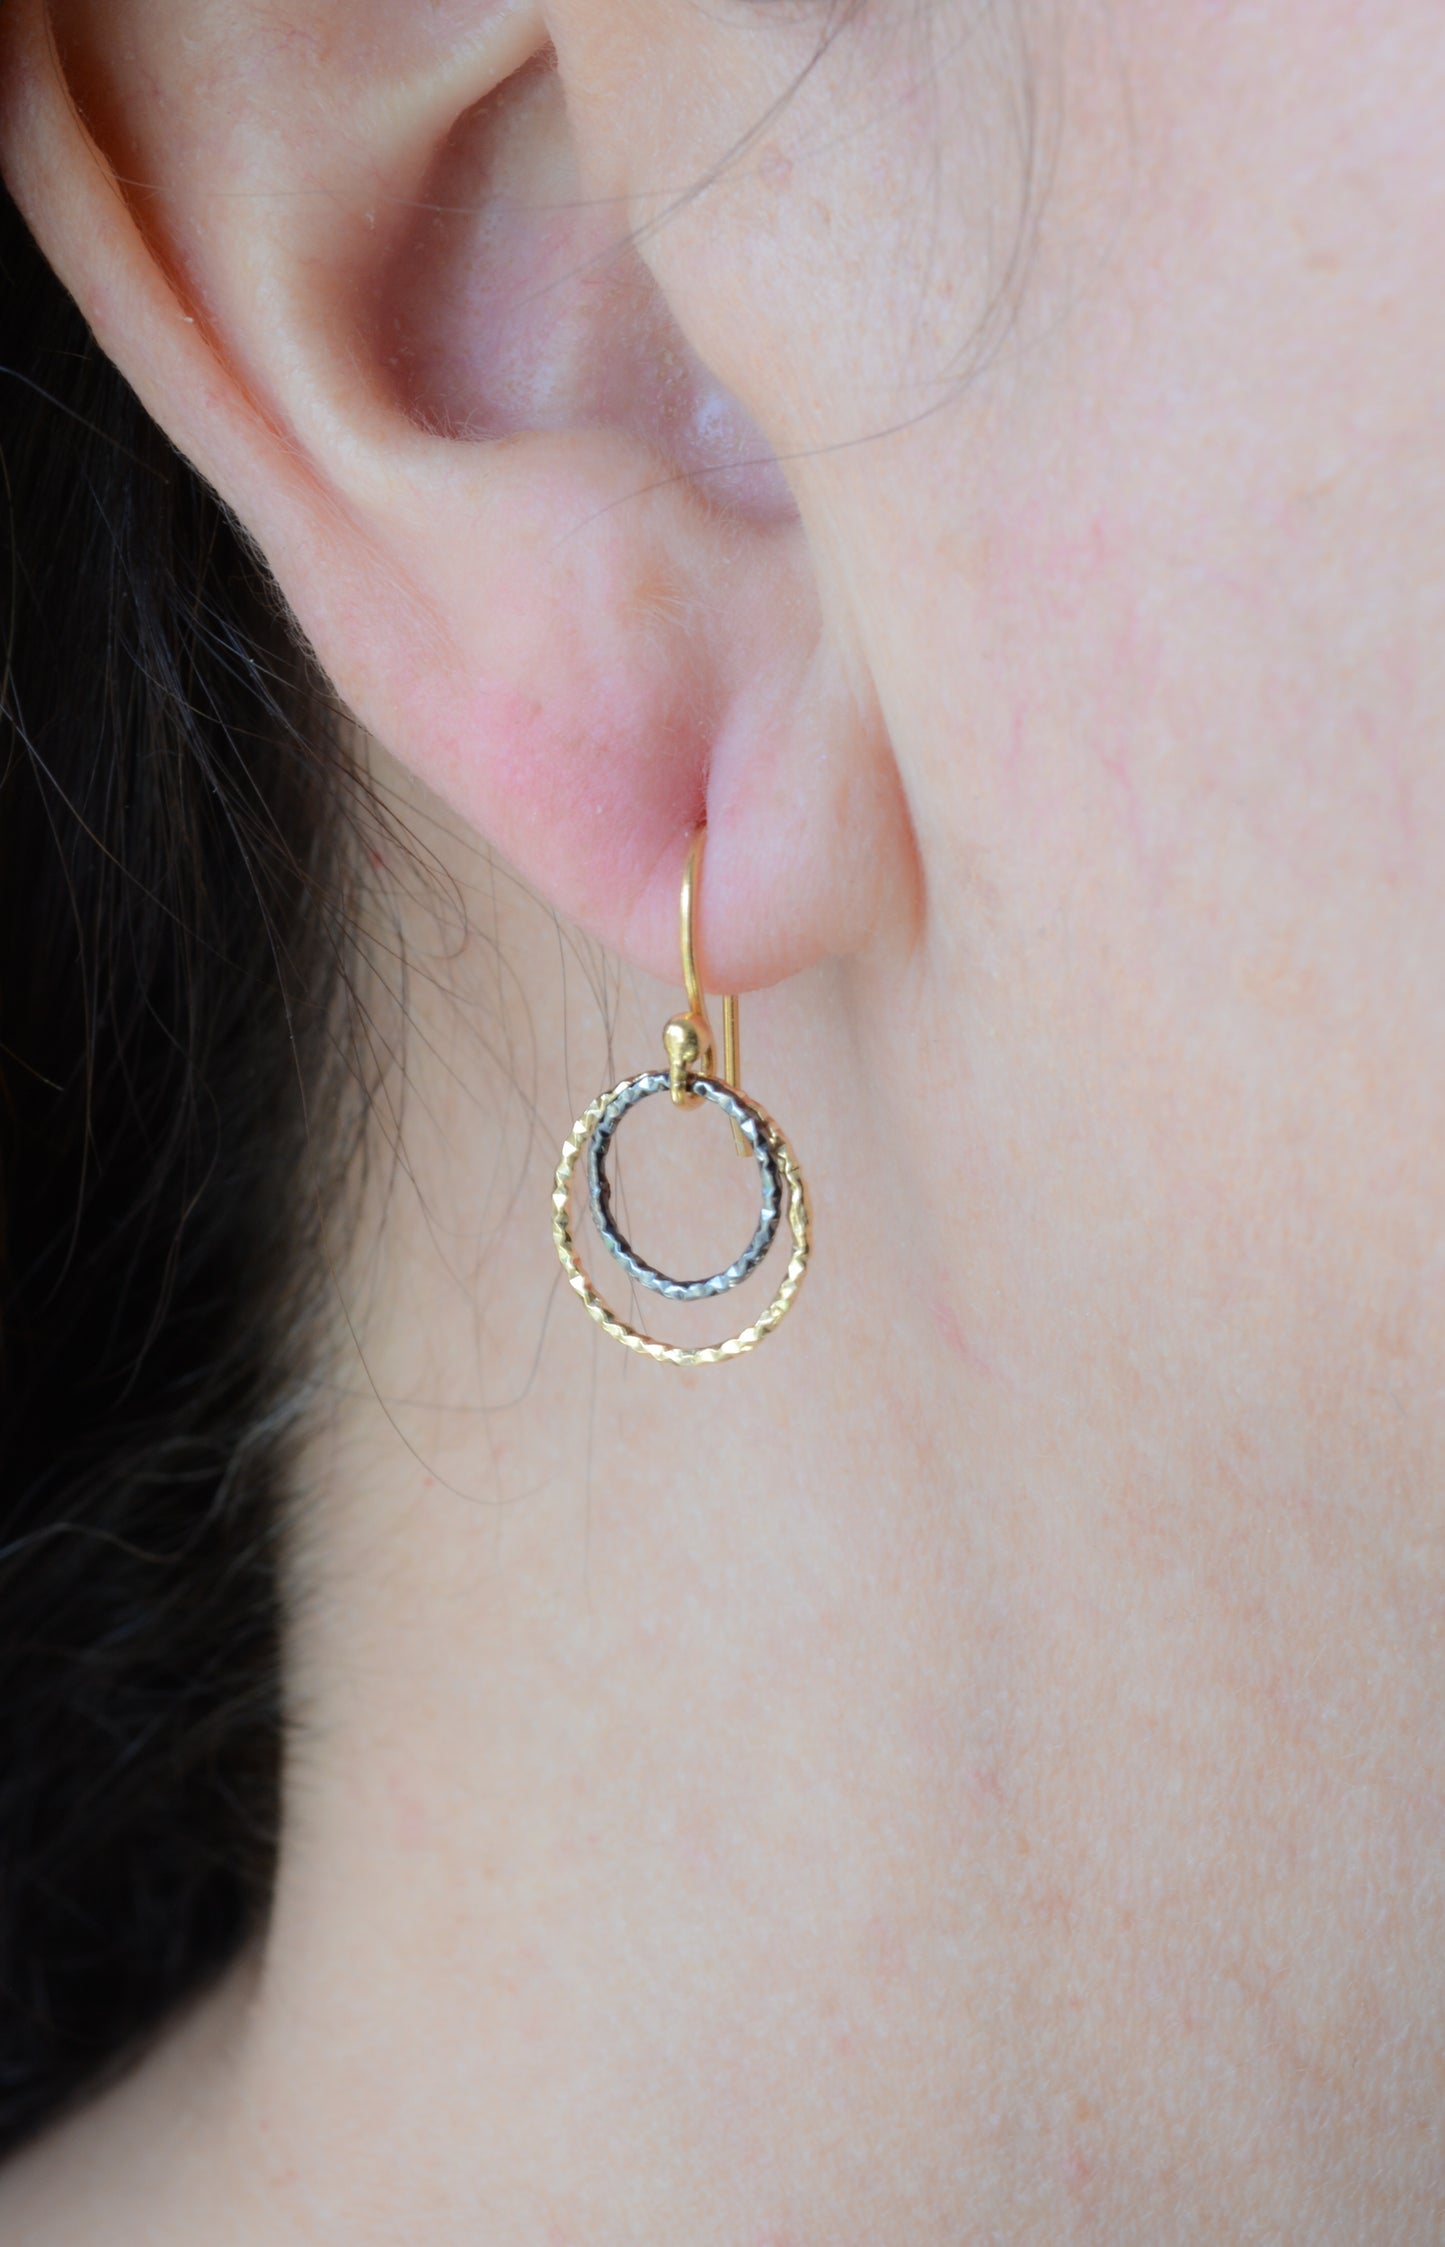 Tiny two-tone hoops